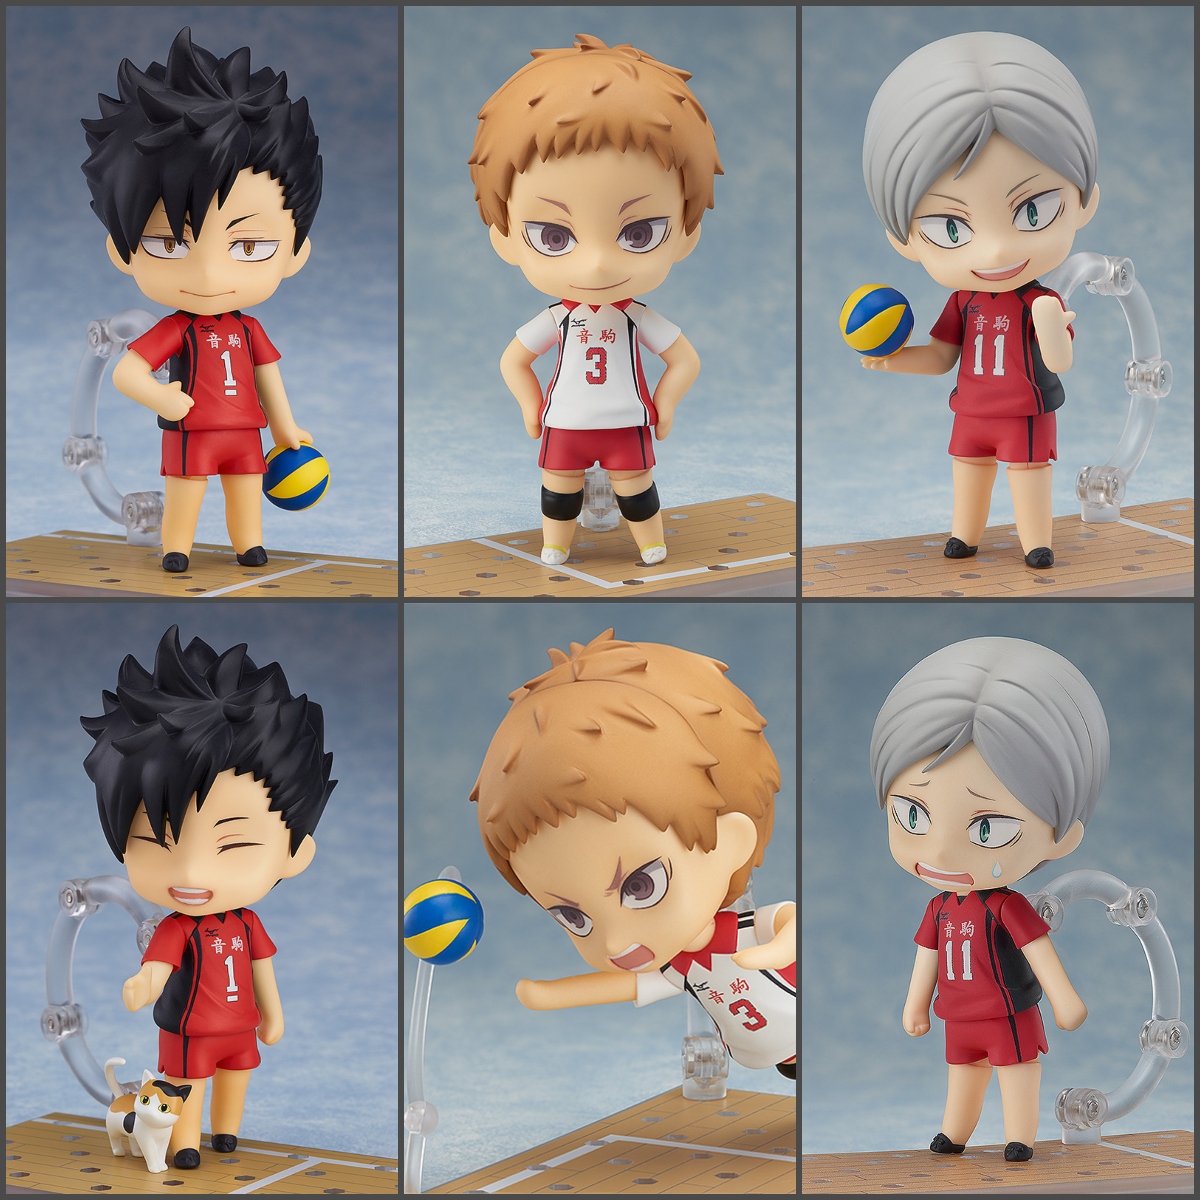 From the popular series 'Haikyu!!', come Nendoroids of your favorite players from Nekoma! Preorder today to add Morisuke Yaku and more players to your collection!

Shop: s.goodsmile.link/hBb

#Haikyuu #Goodsmile